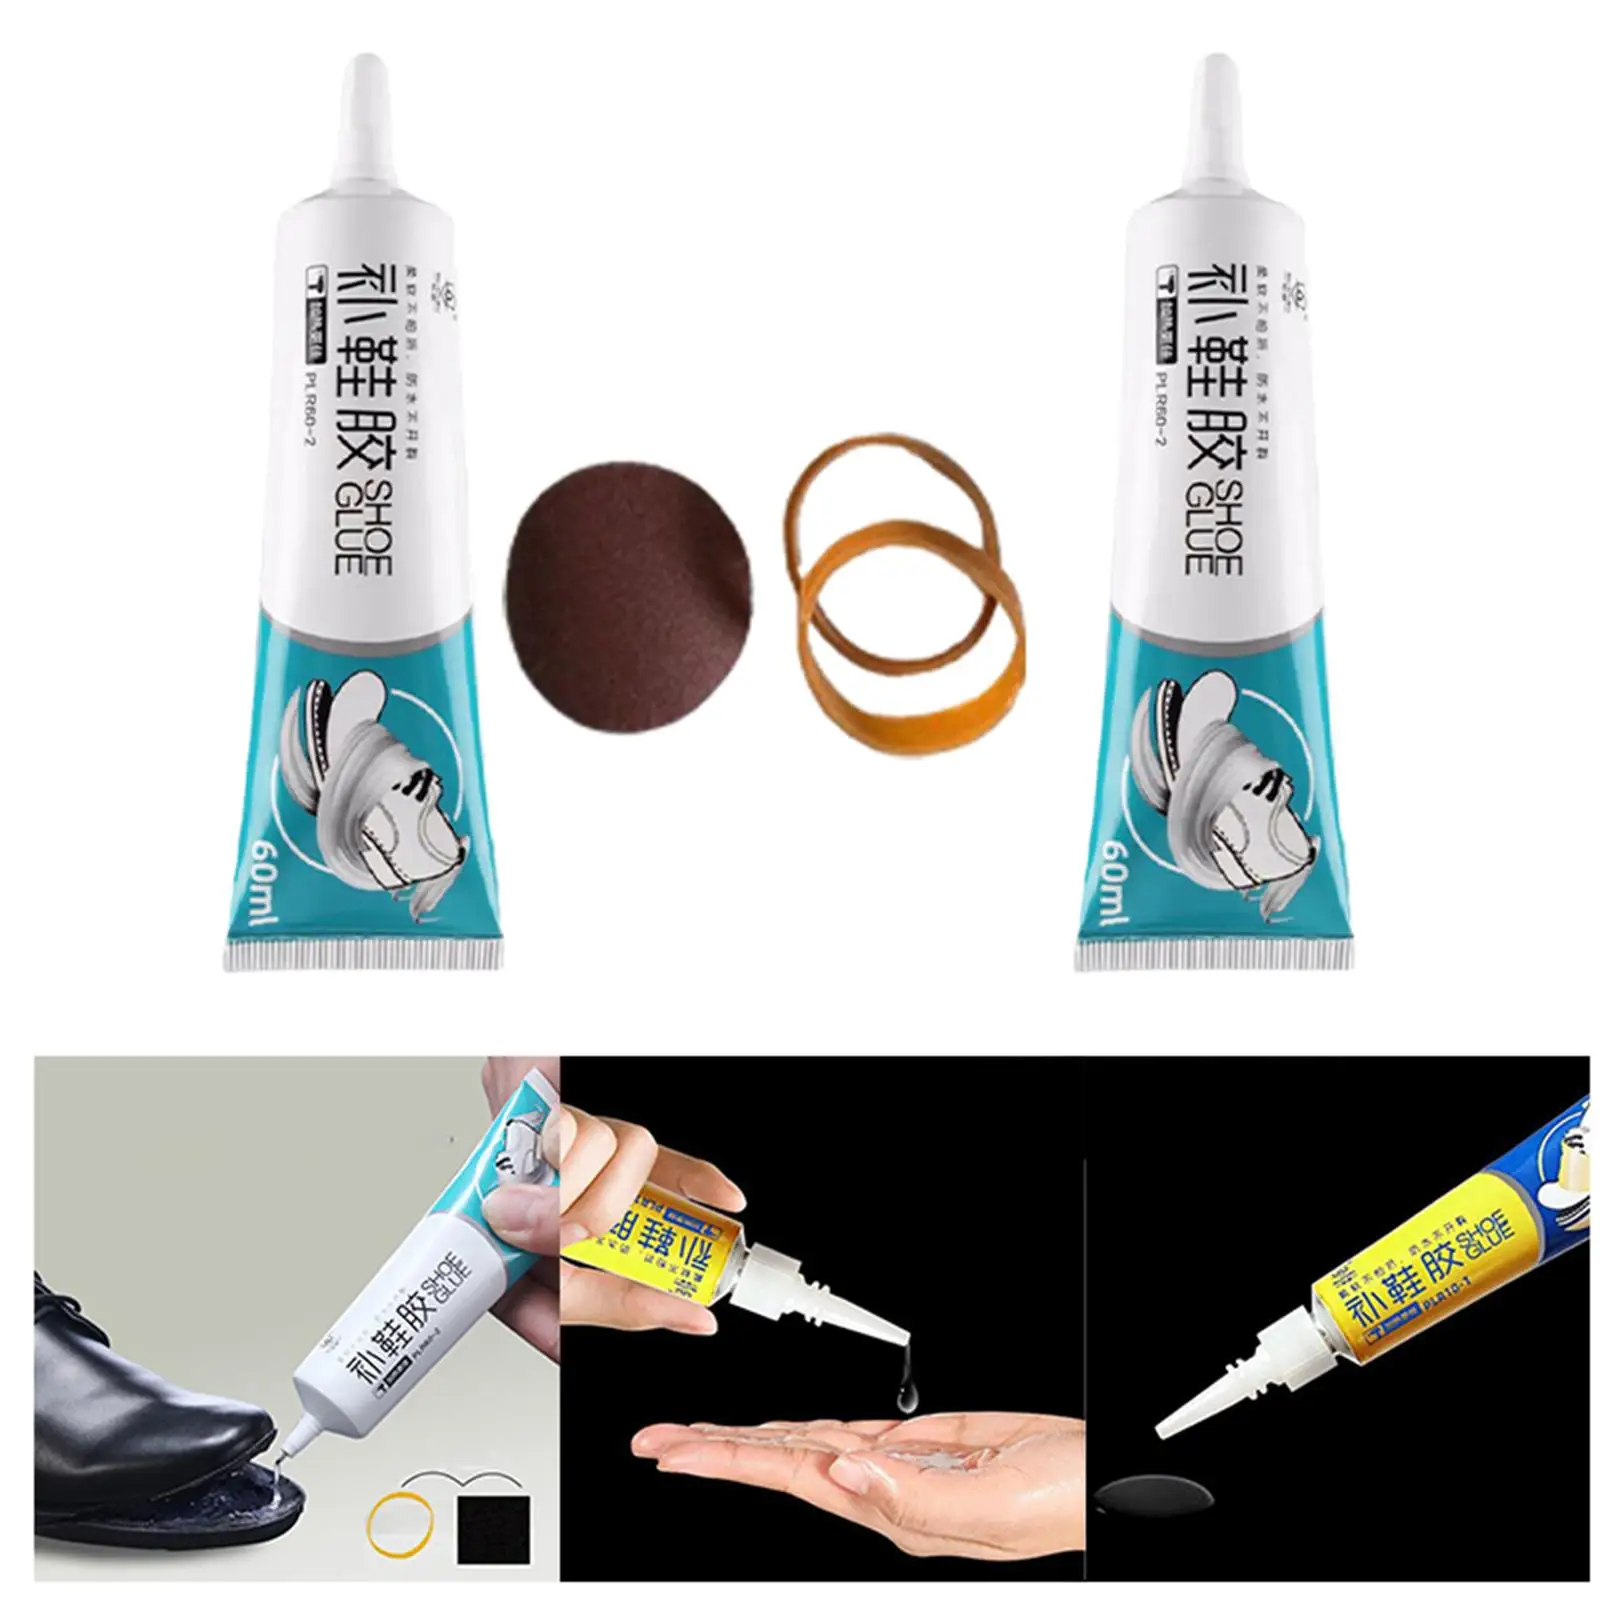 Shoe Repairing Glue Sturdy Maintenance Tool Item Repair Adhesive Glue for Neoprene Climbing Shoes Leather Running Shoes Protects